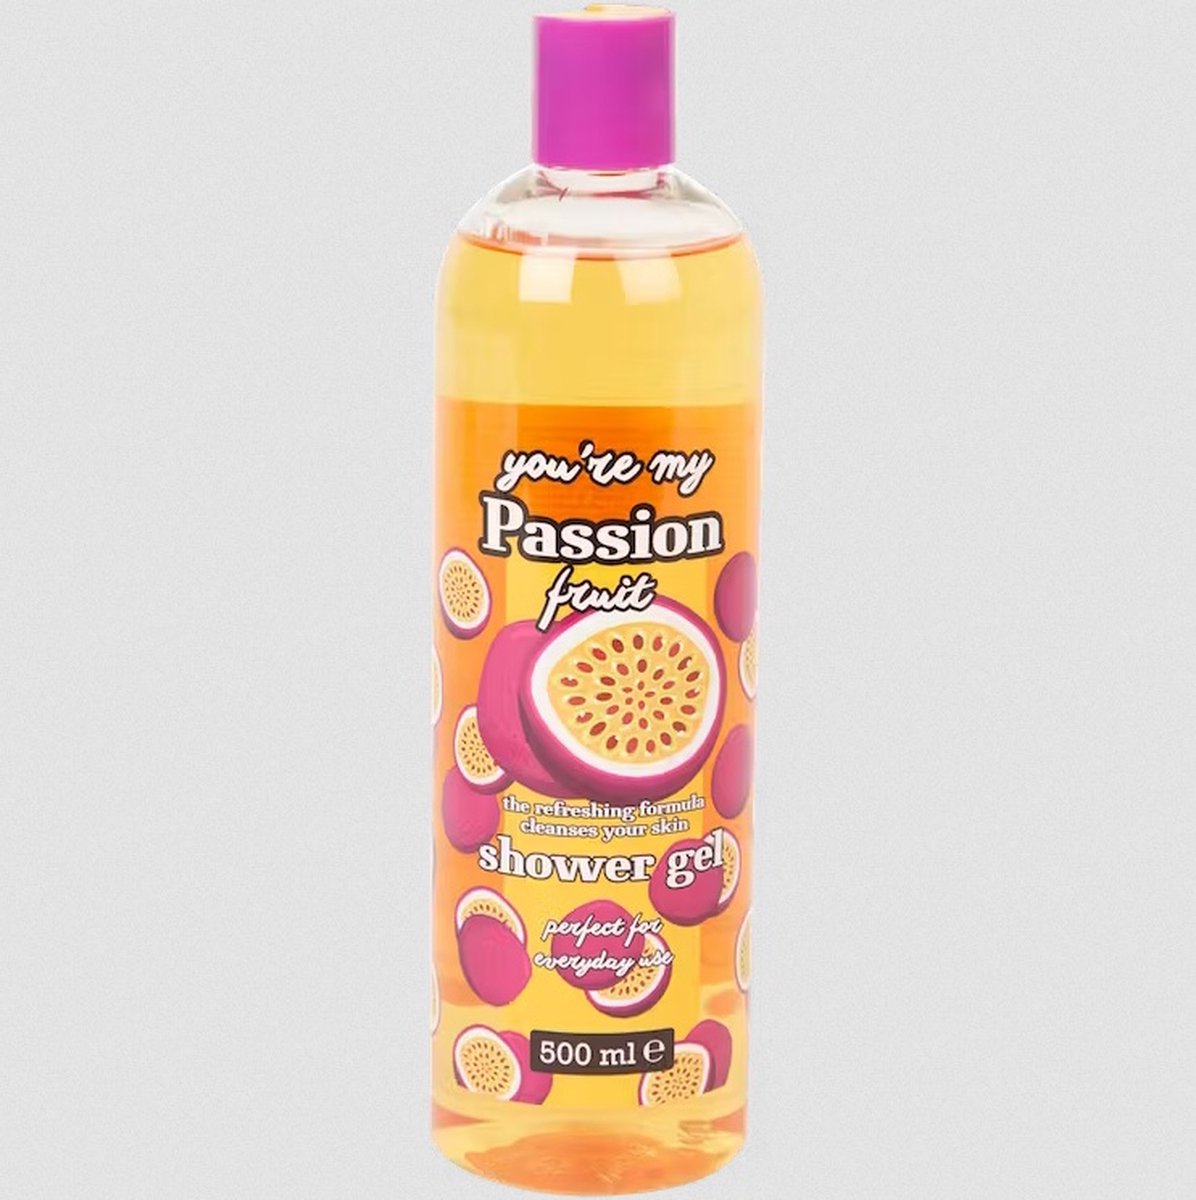 You're My Passion Fruit Shower gel 500 ml - Showergel - Douchegel - Douche gel - Passionfruit - Passievrucht - Passie vrucht